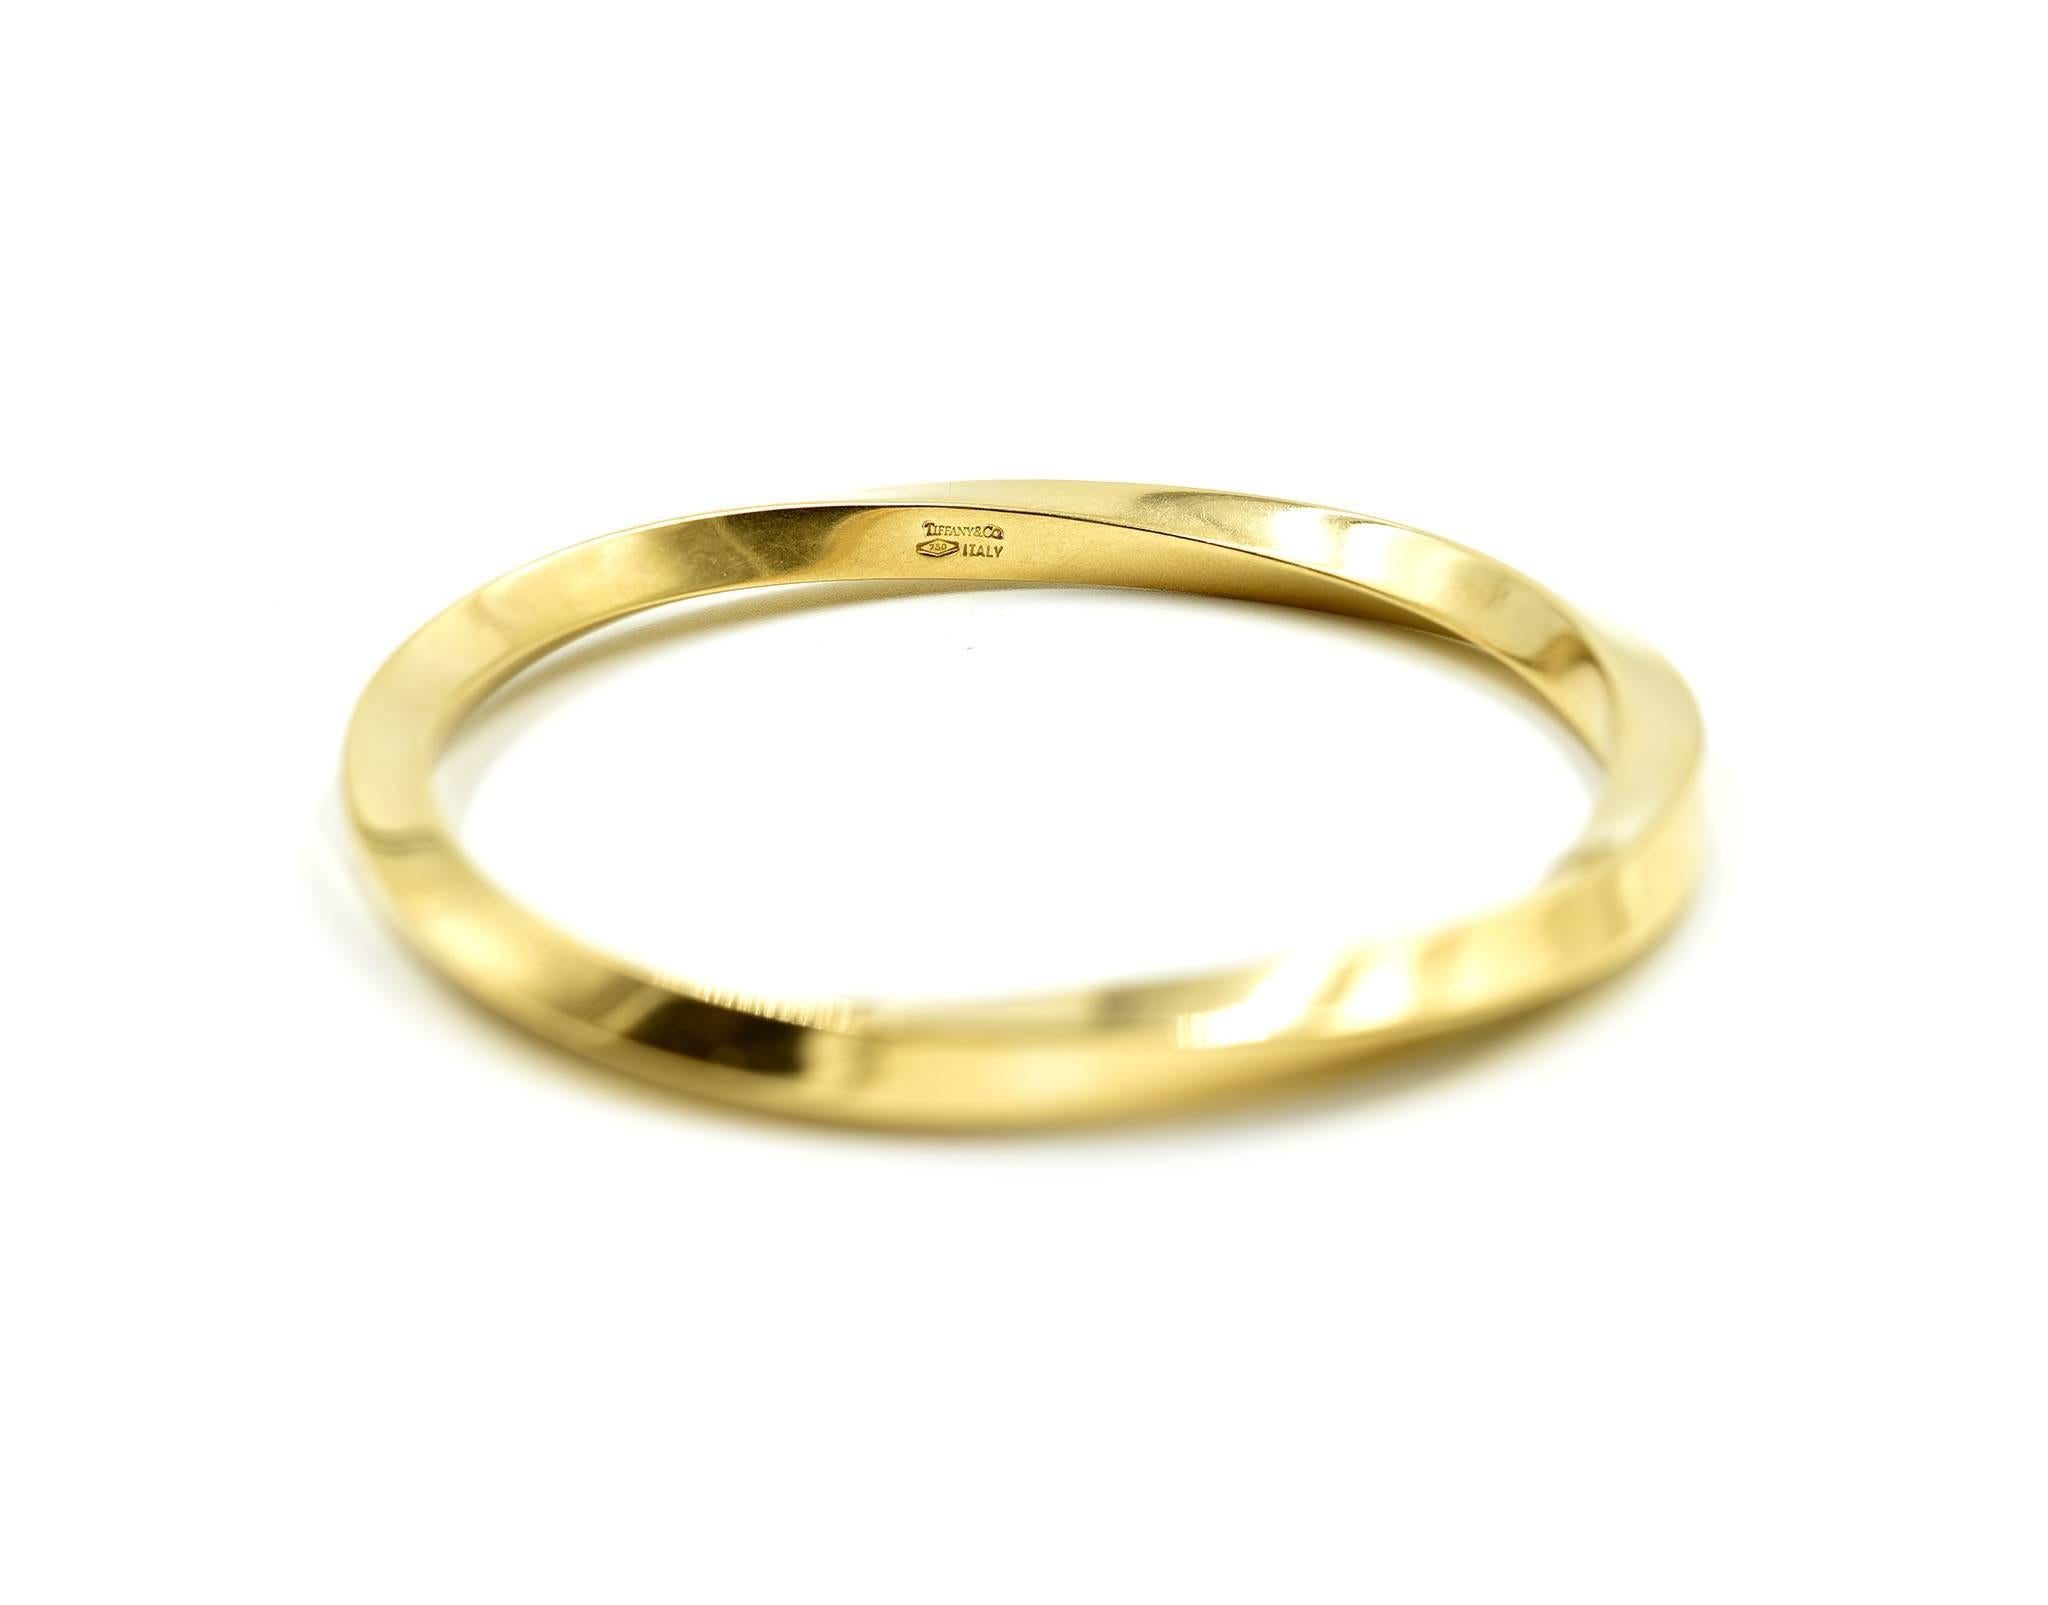 Designer: Tiffany & Co
Material: 14k yellow gold
Dimensions: the bangle will fit up to a 7 1/2-inch wrist and is 1/4 inches wide
Weight: 34.37 grams
